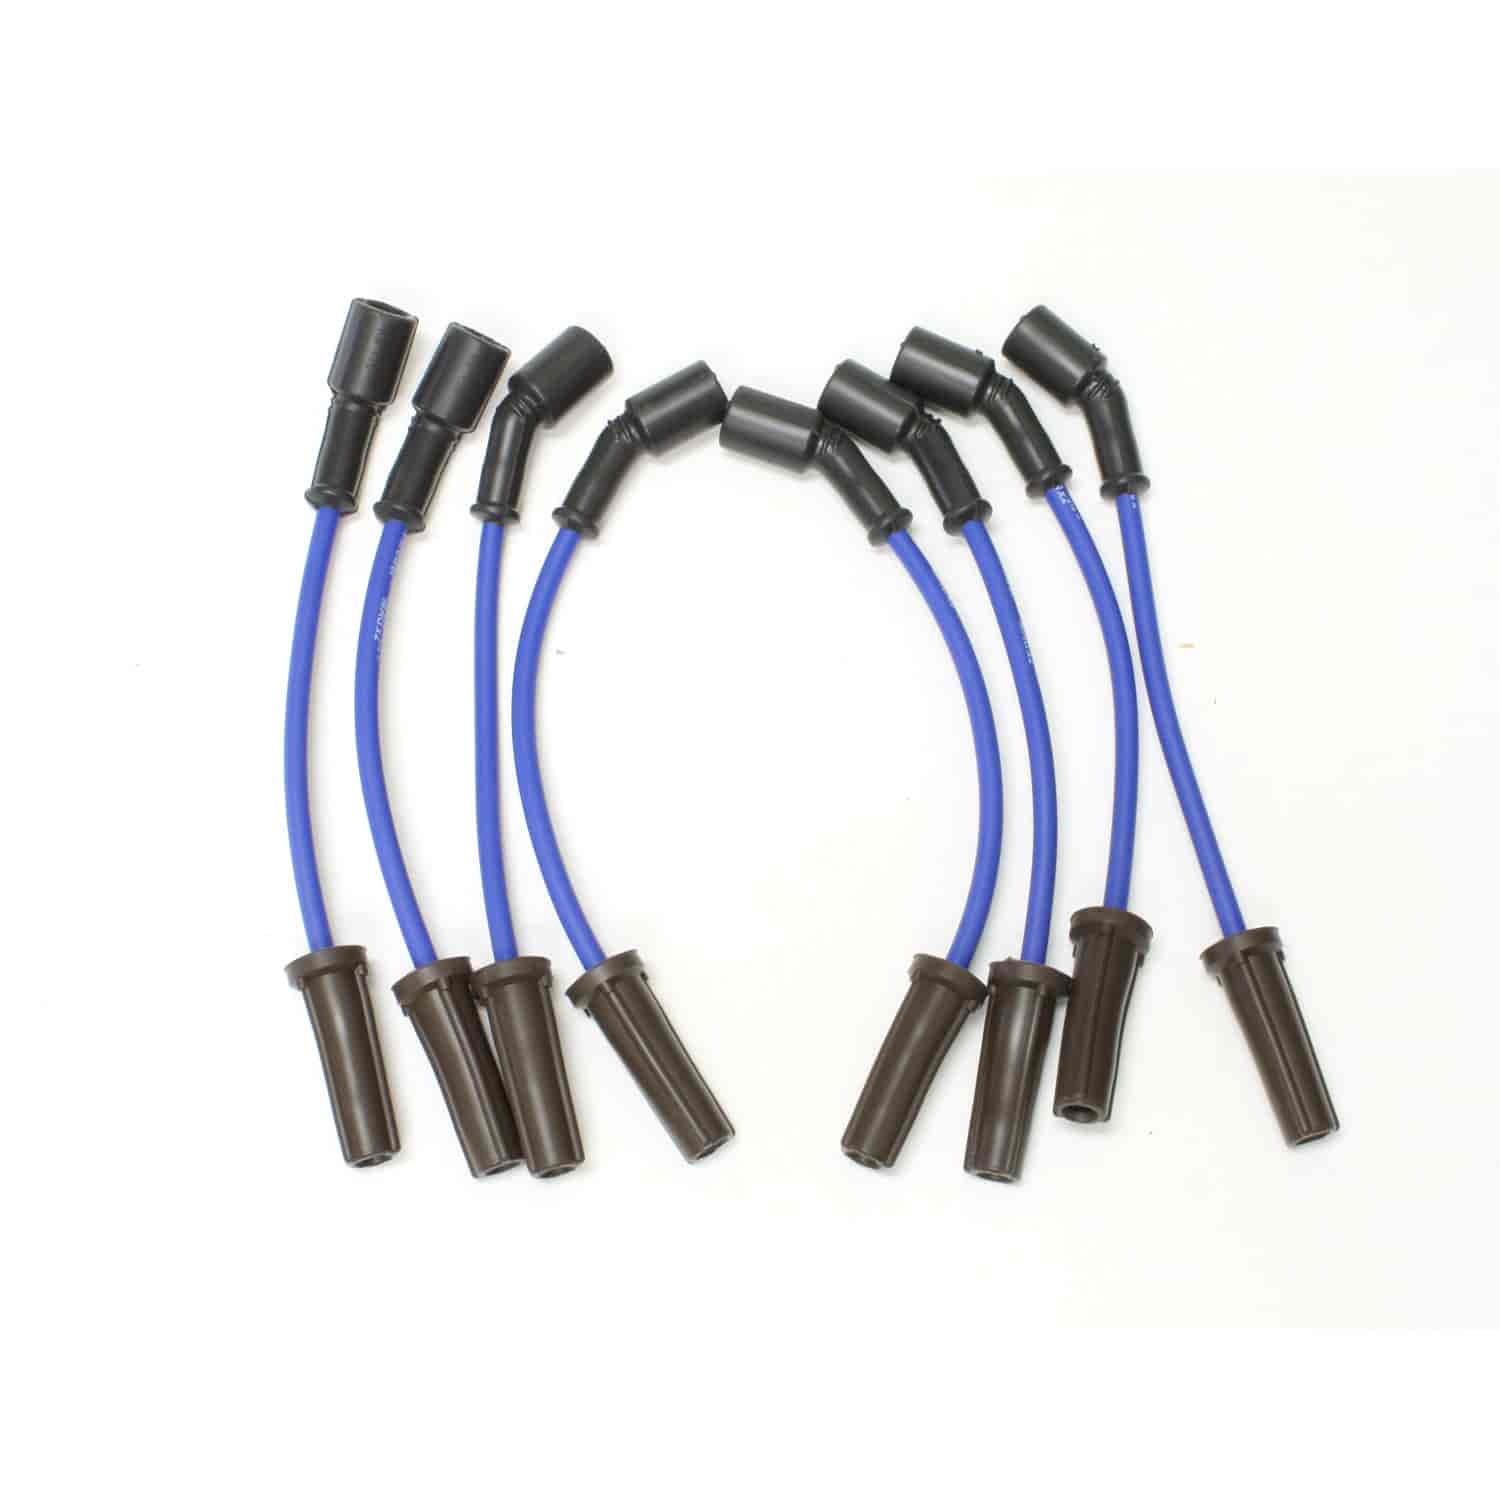 PerTronix 808330 Flame-Thrower Spark Plug Wires 8 cyl GM Custom Fit Blue